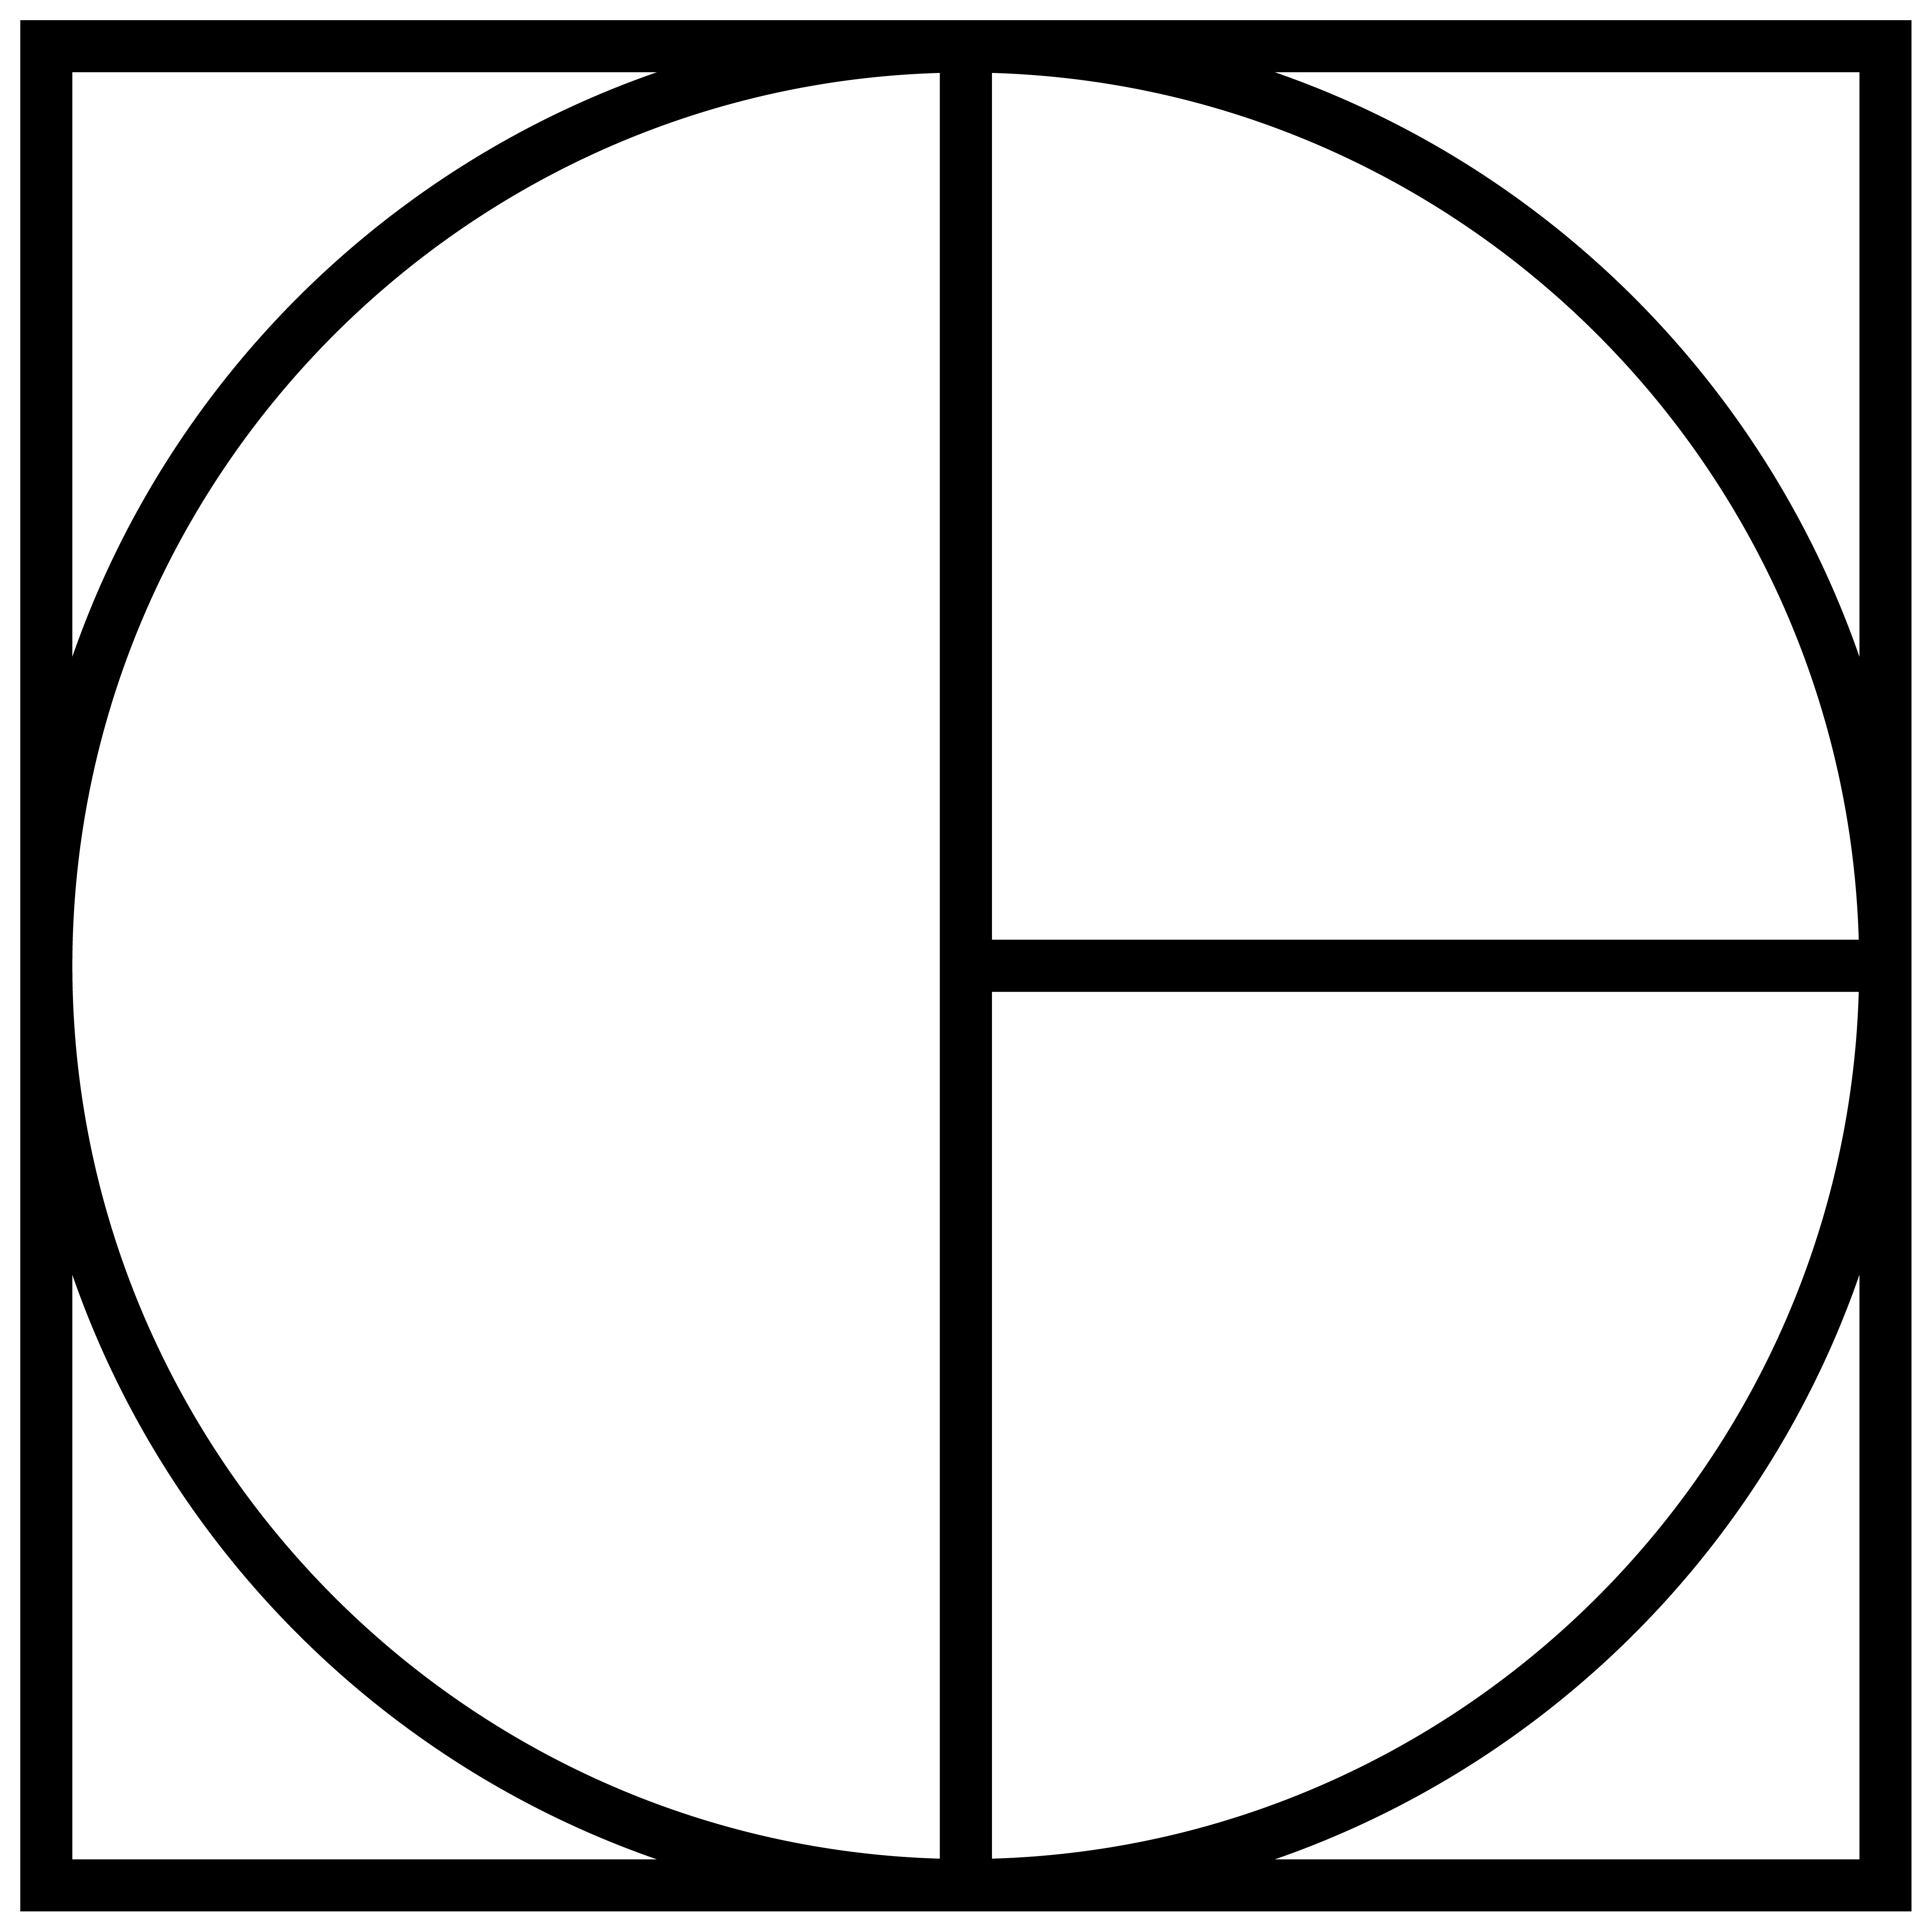 The logo of a brand promoting self-expression and reflection.